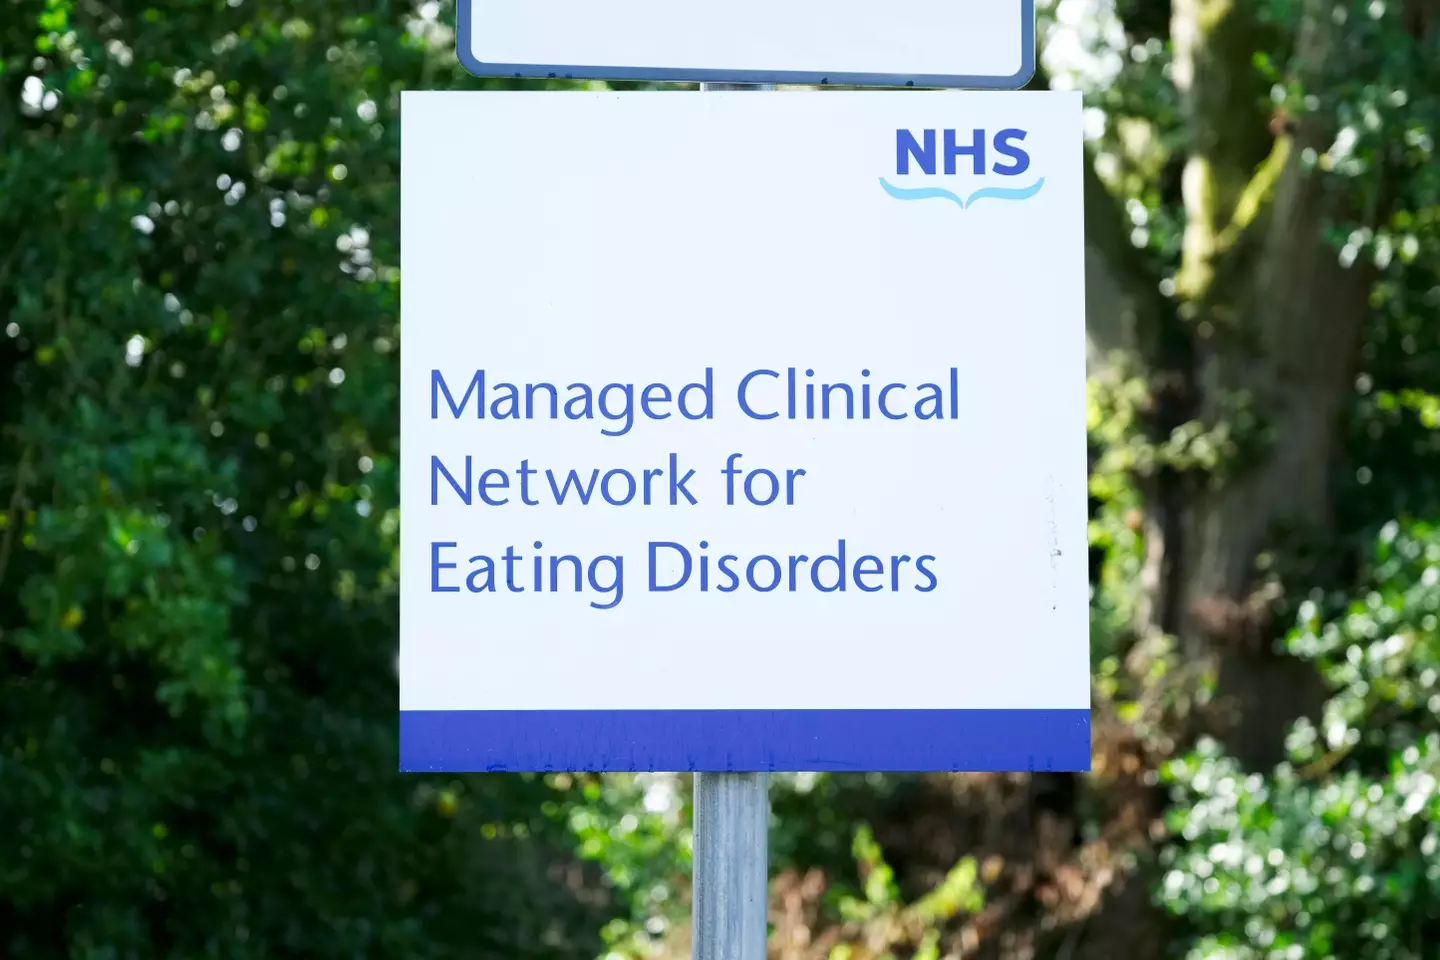 Concerns have been raised over what impact the drug could have for people with eating disorders.